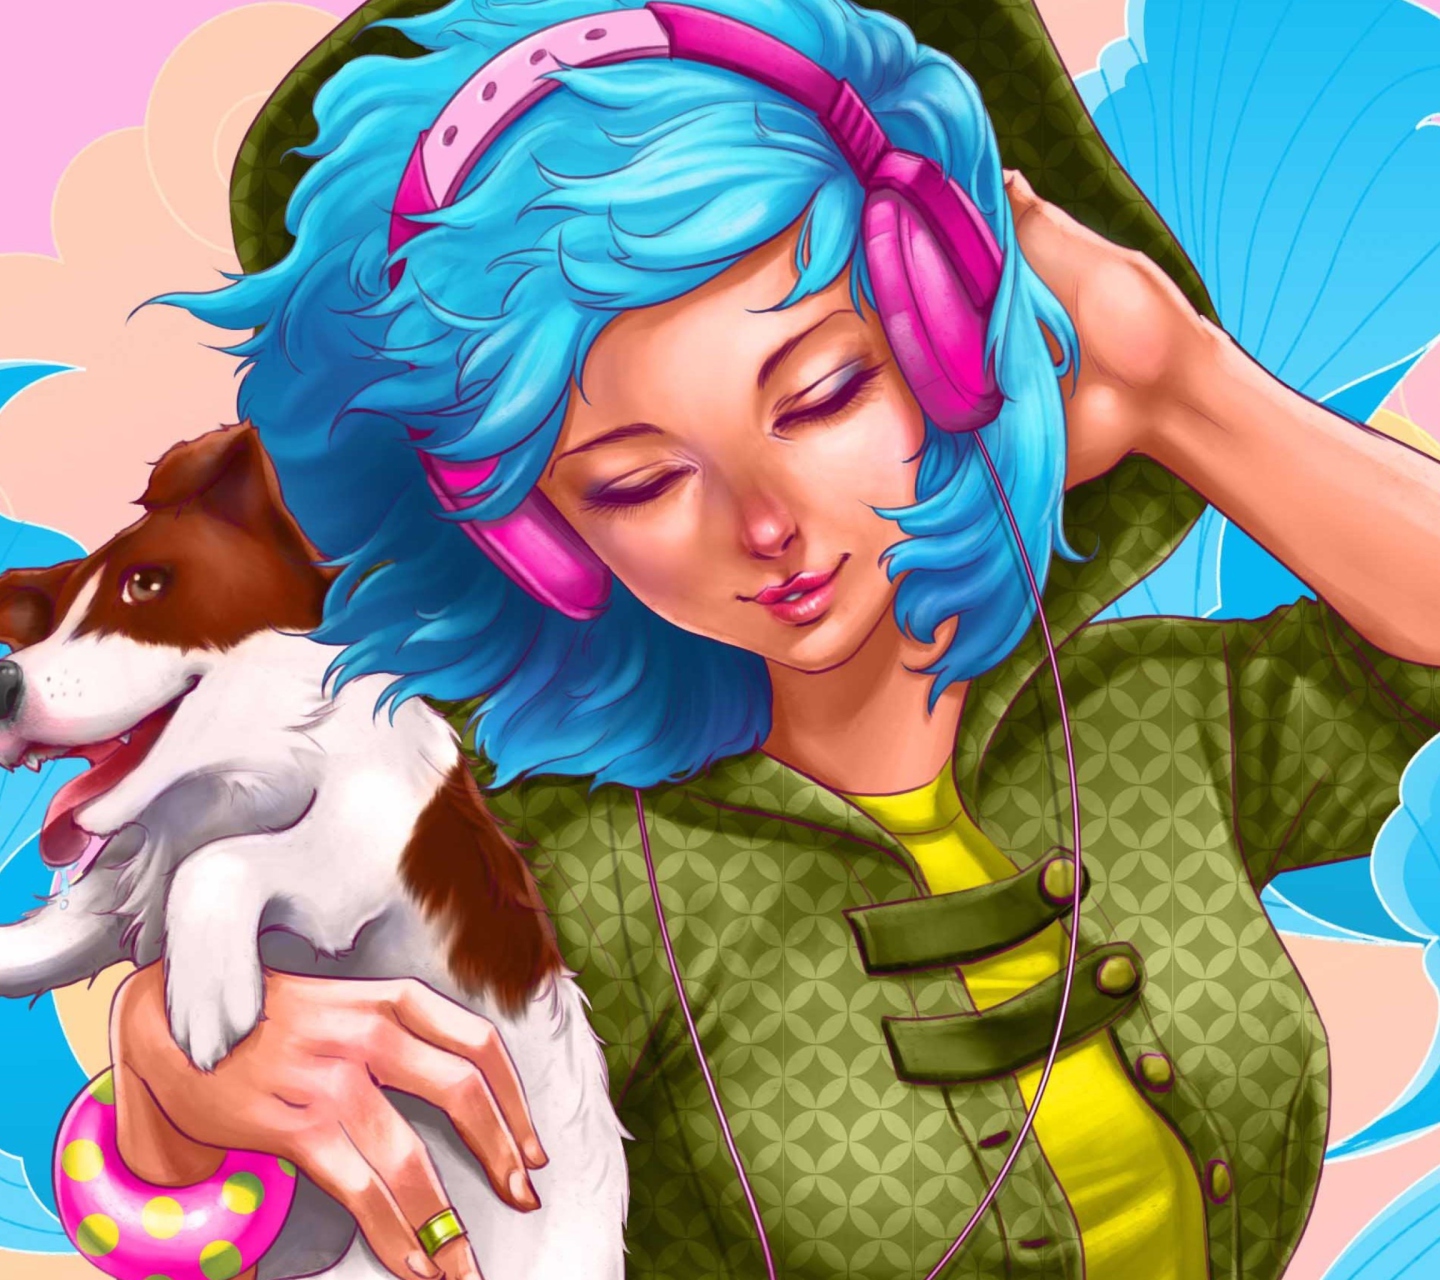 Girl With Blue Hair And Pink Headphones Drawing screenshot #1 1440x1280